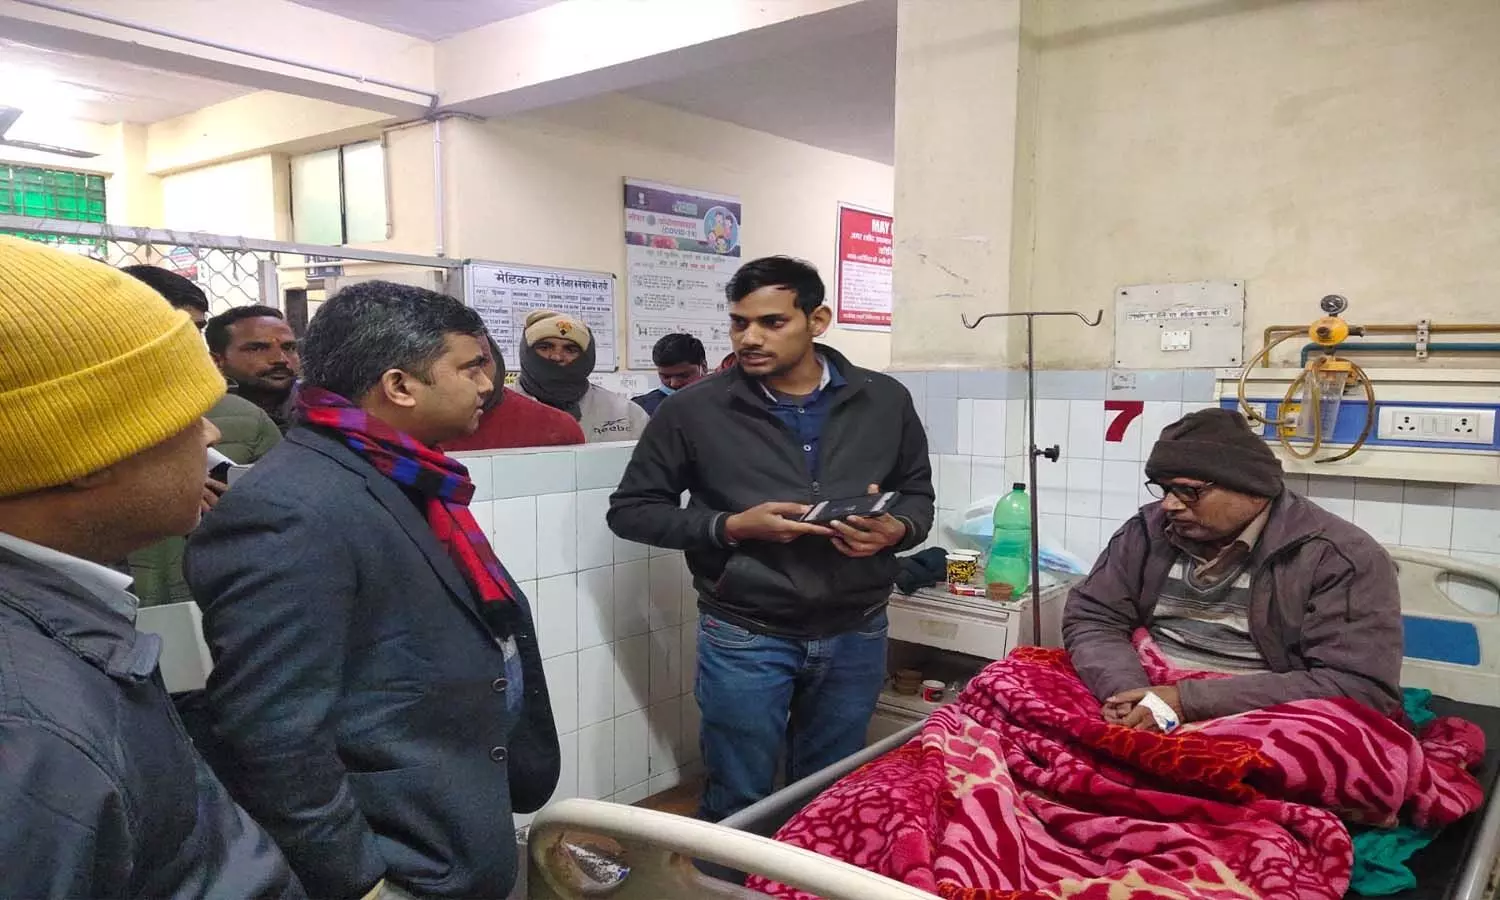 After inspecting the district hospital in Jaunpur, the DM ordered to deduct the salary of 5 personnel including the doctor.